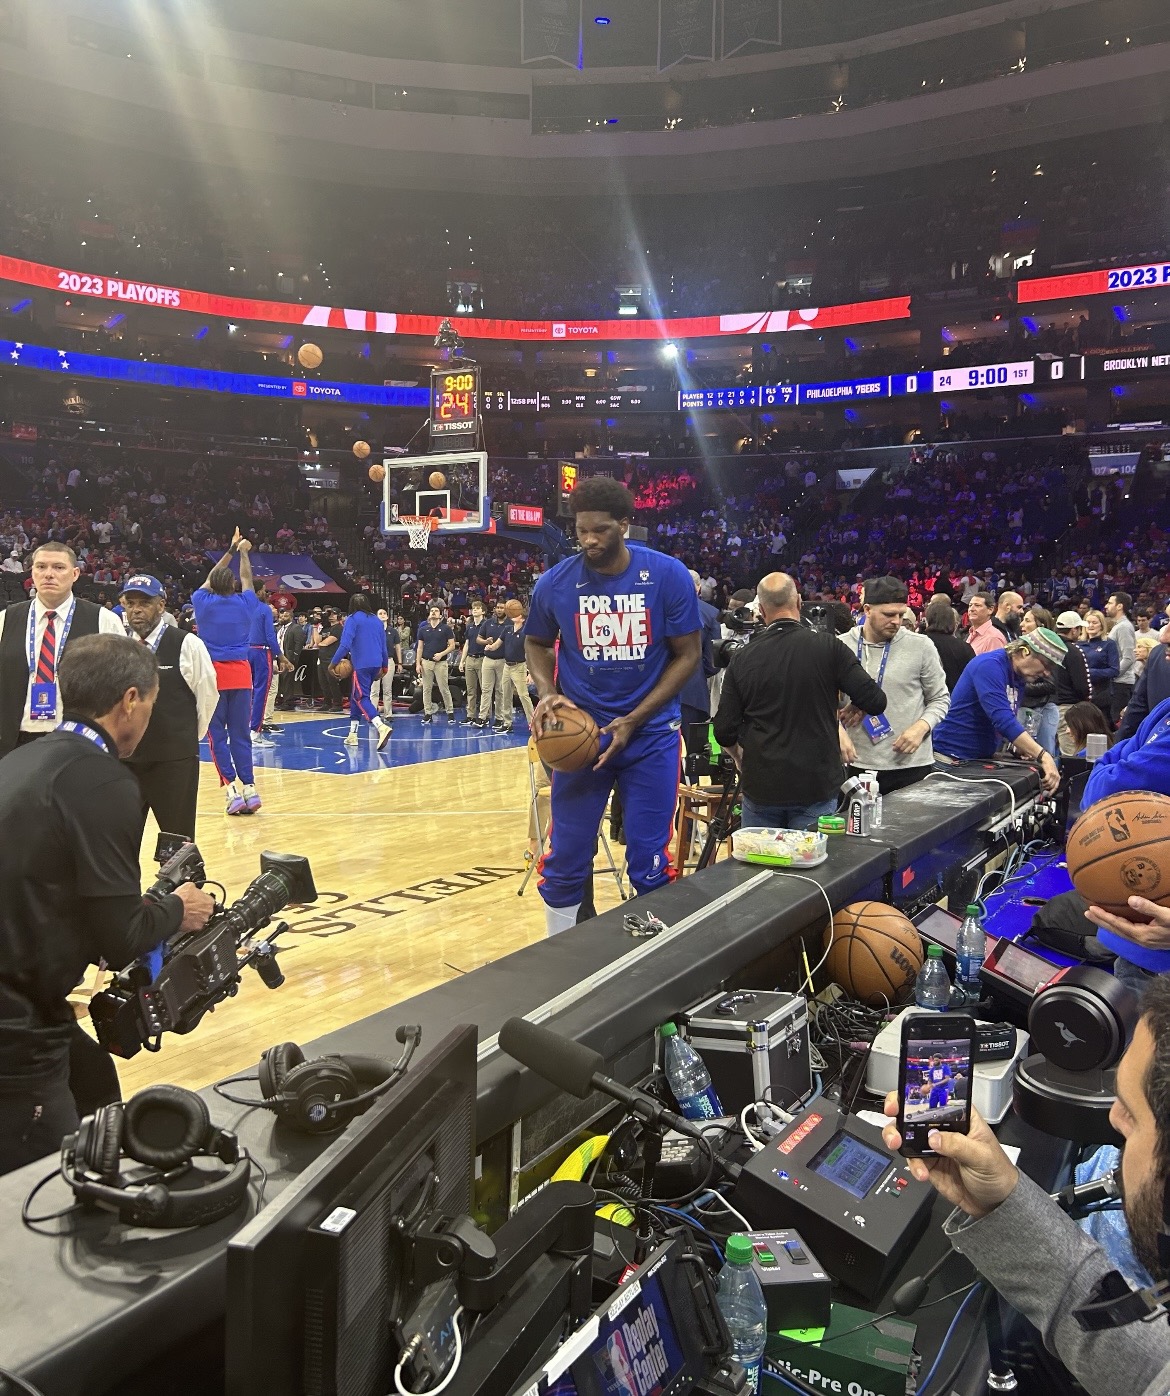 WATCH: Nick Sirianni rings the bell at Sixers playoff game